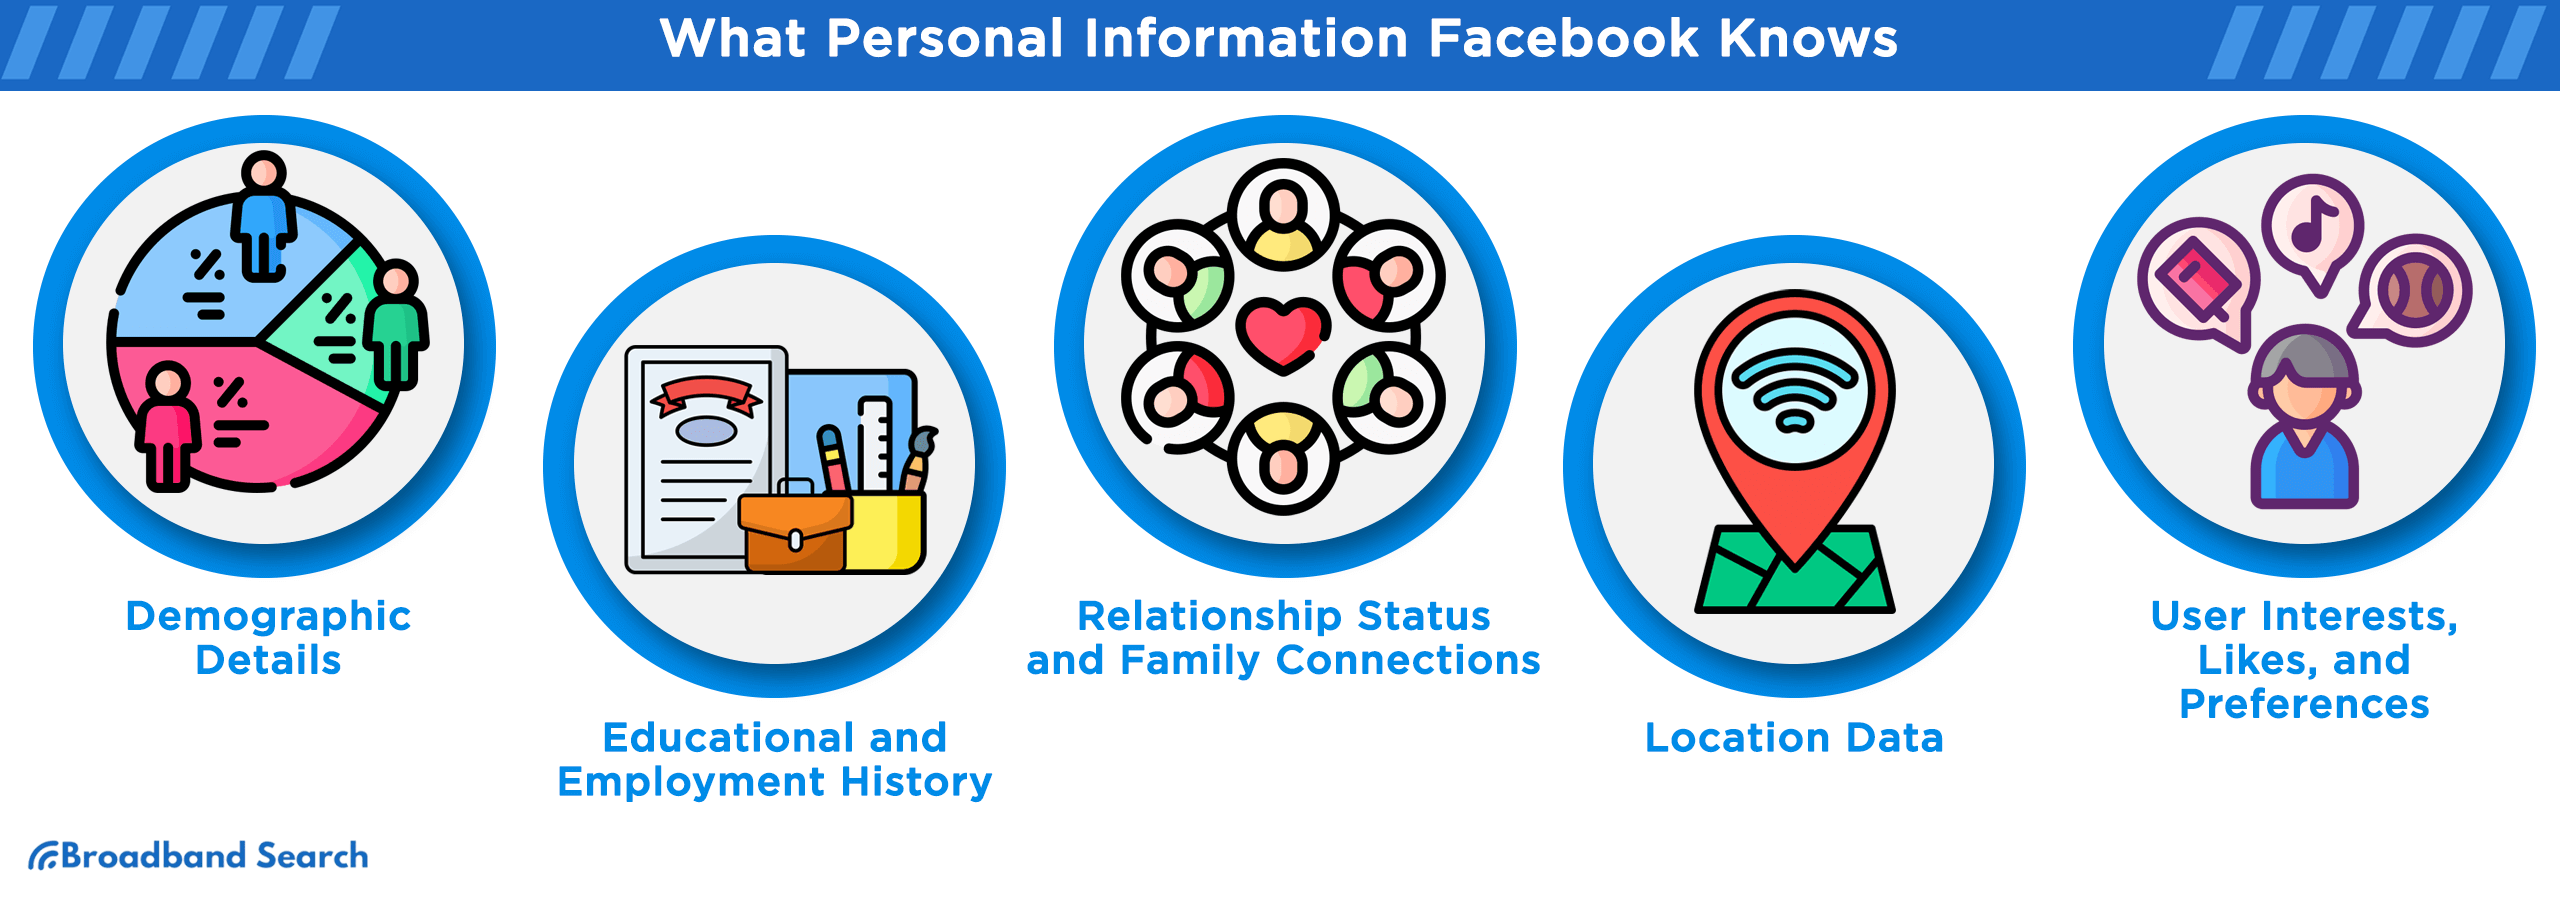 What Personal Information Facebook knows